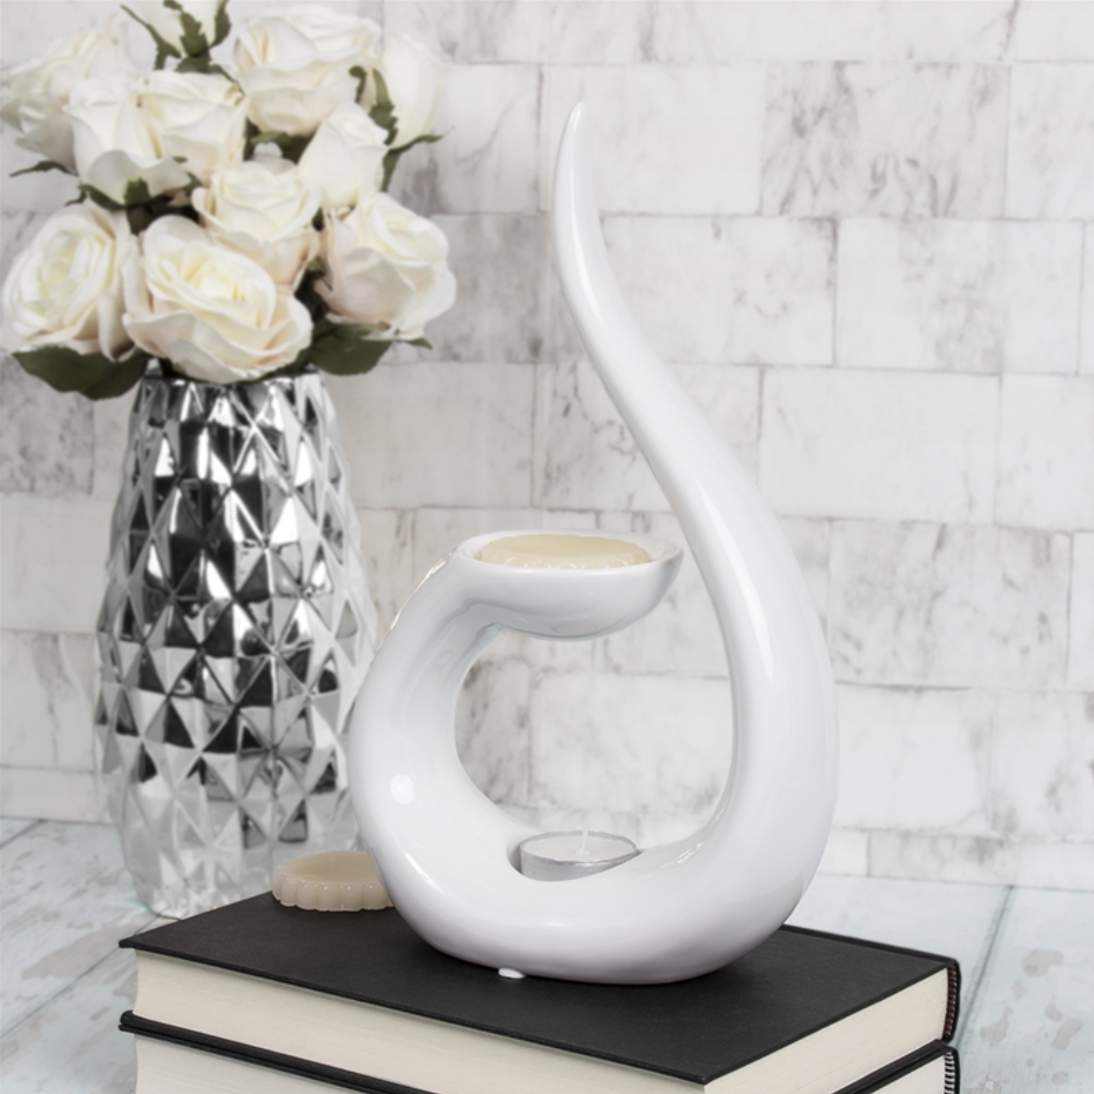 White Spiral Wax Burner (29cm)-FREE Shipping over £35.00-